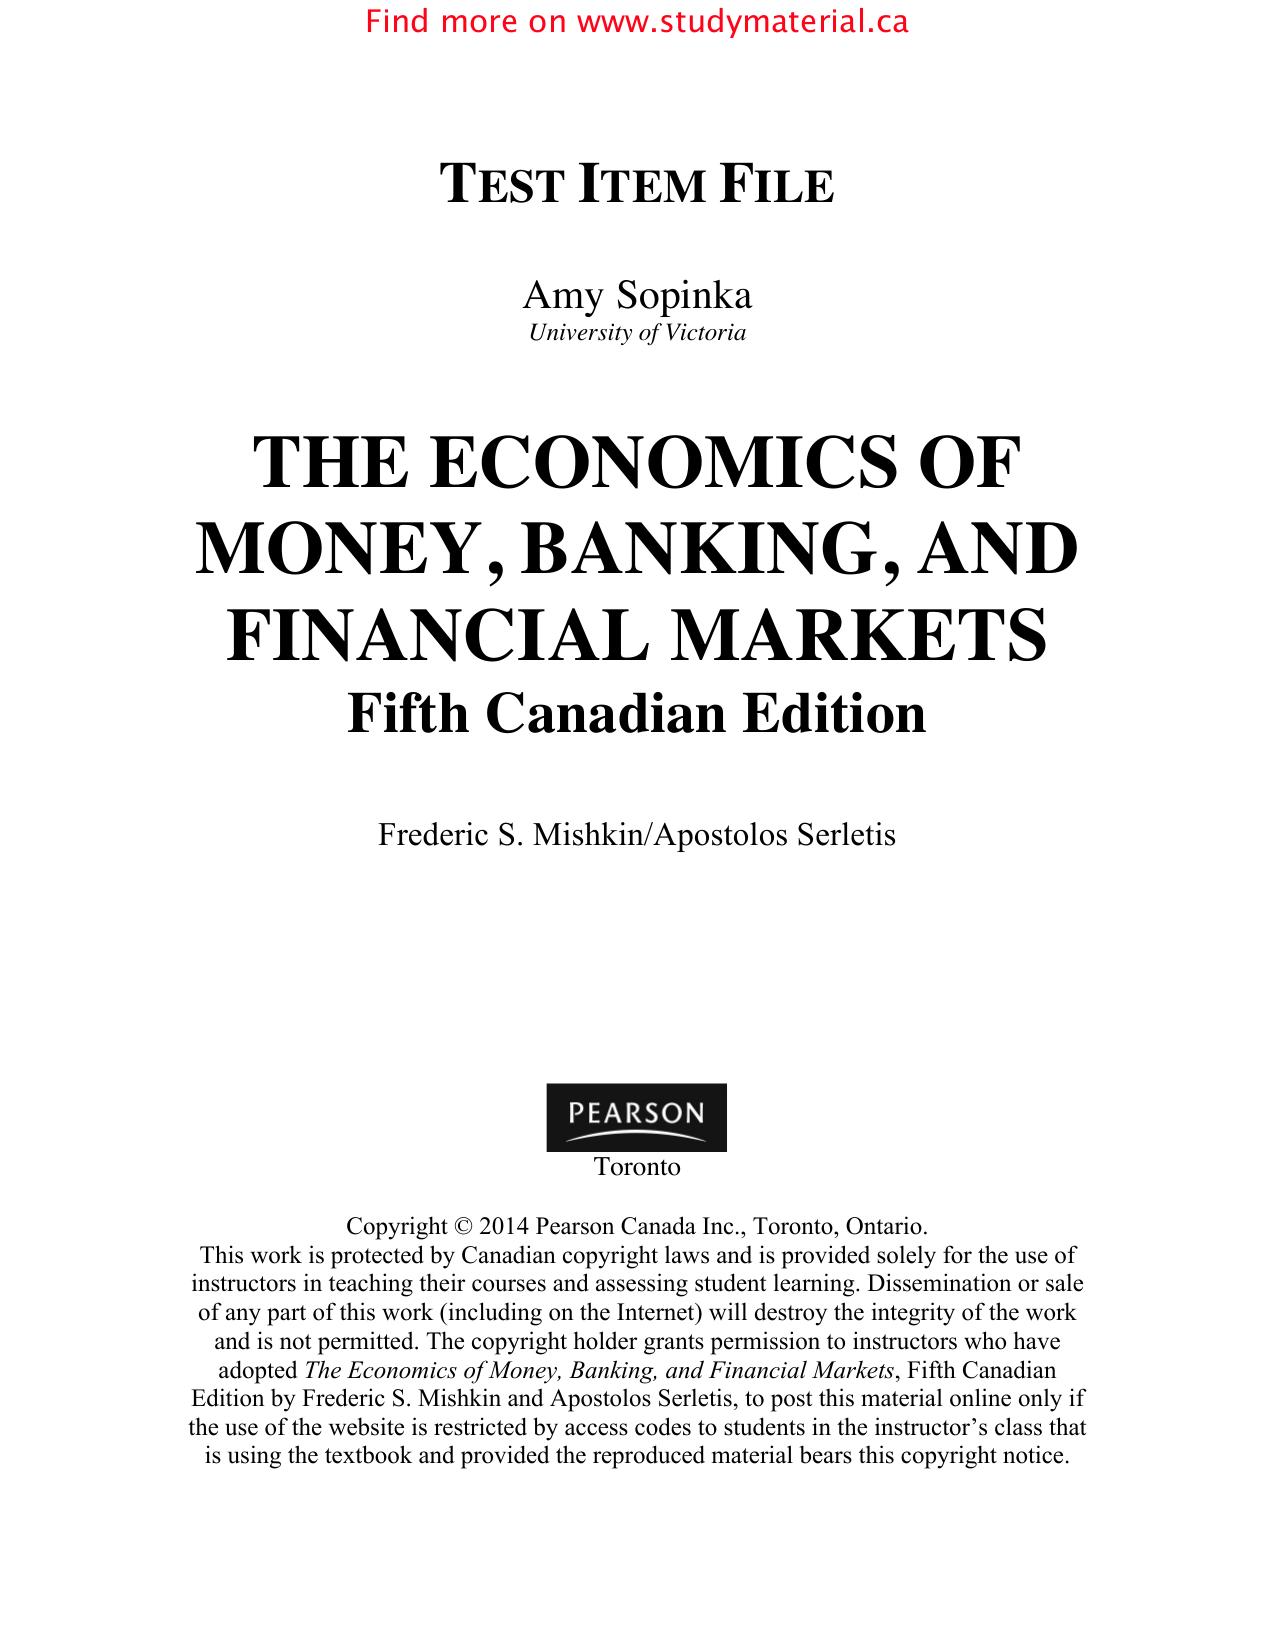 the economics of money, banking, and financial markets 2014